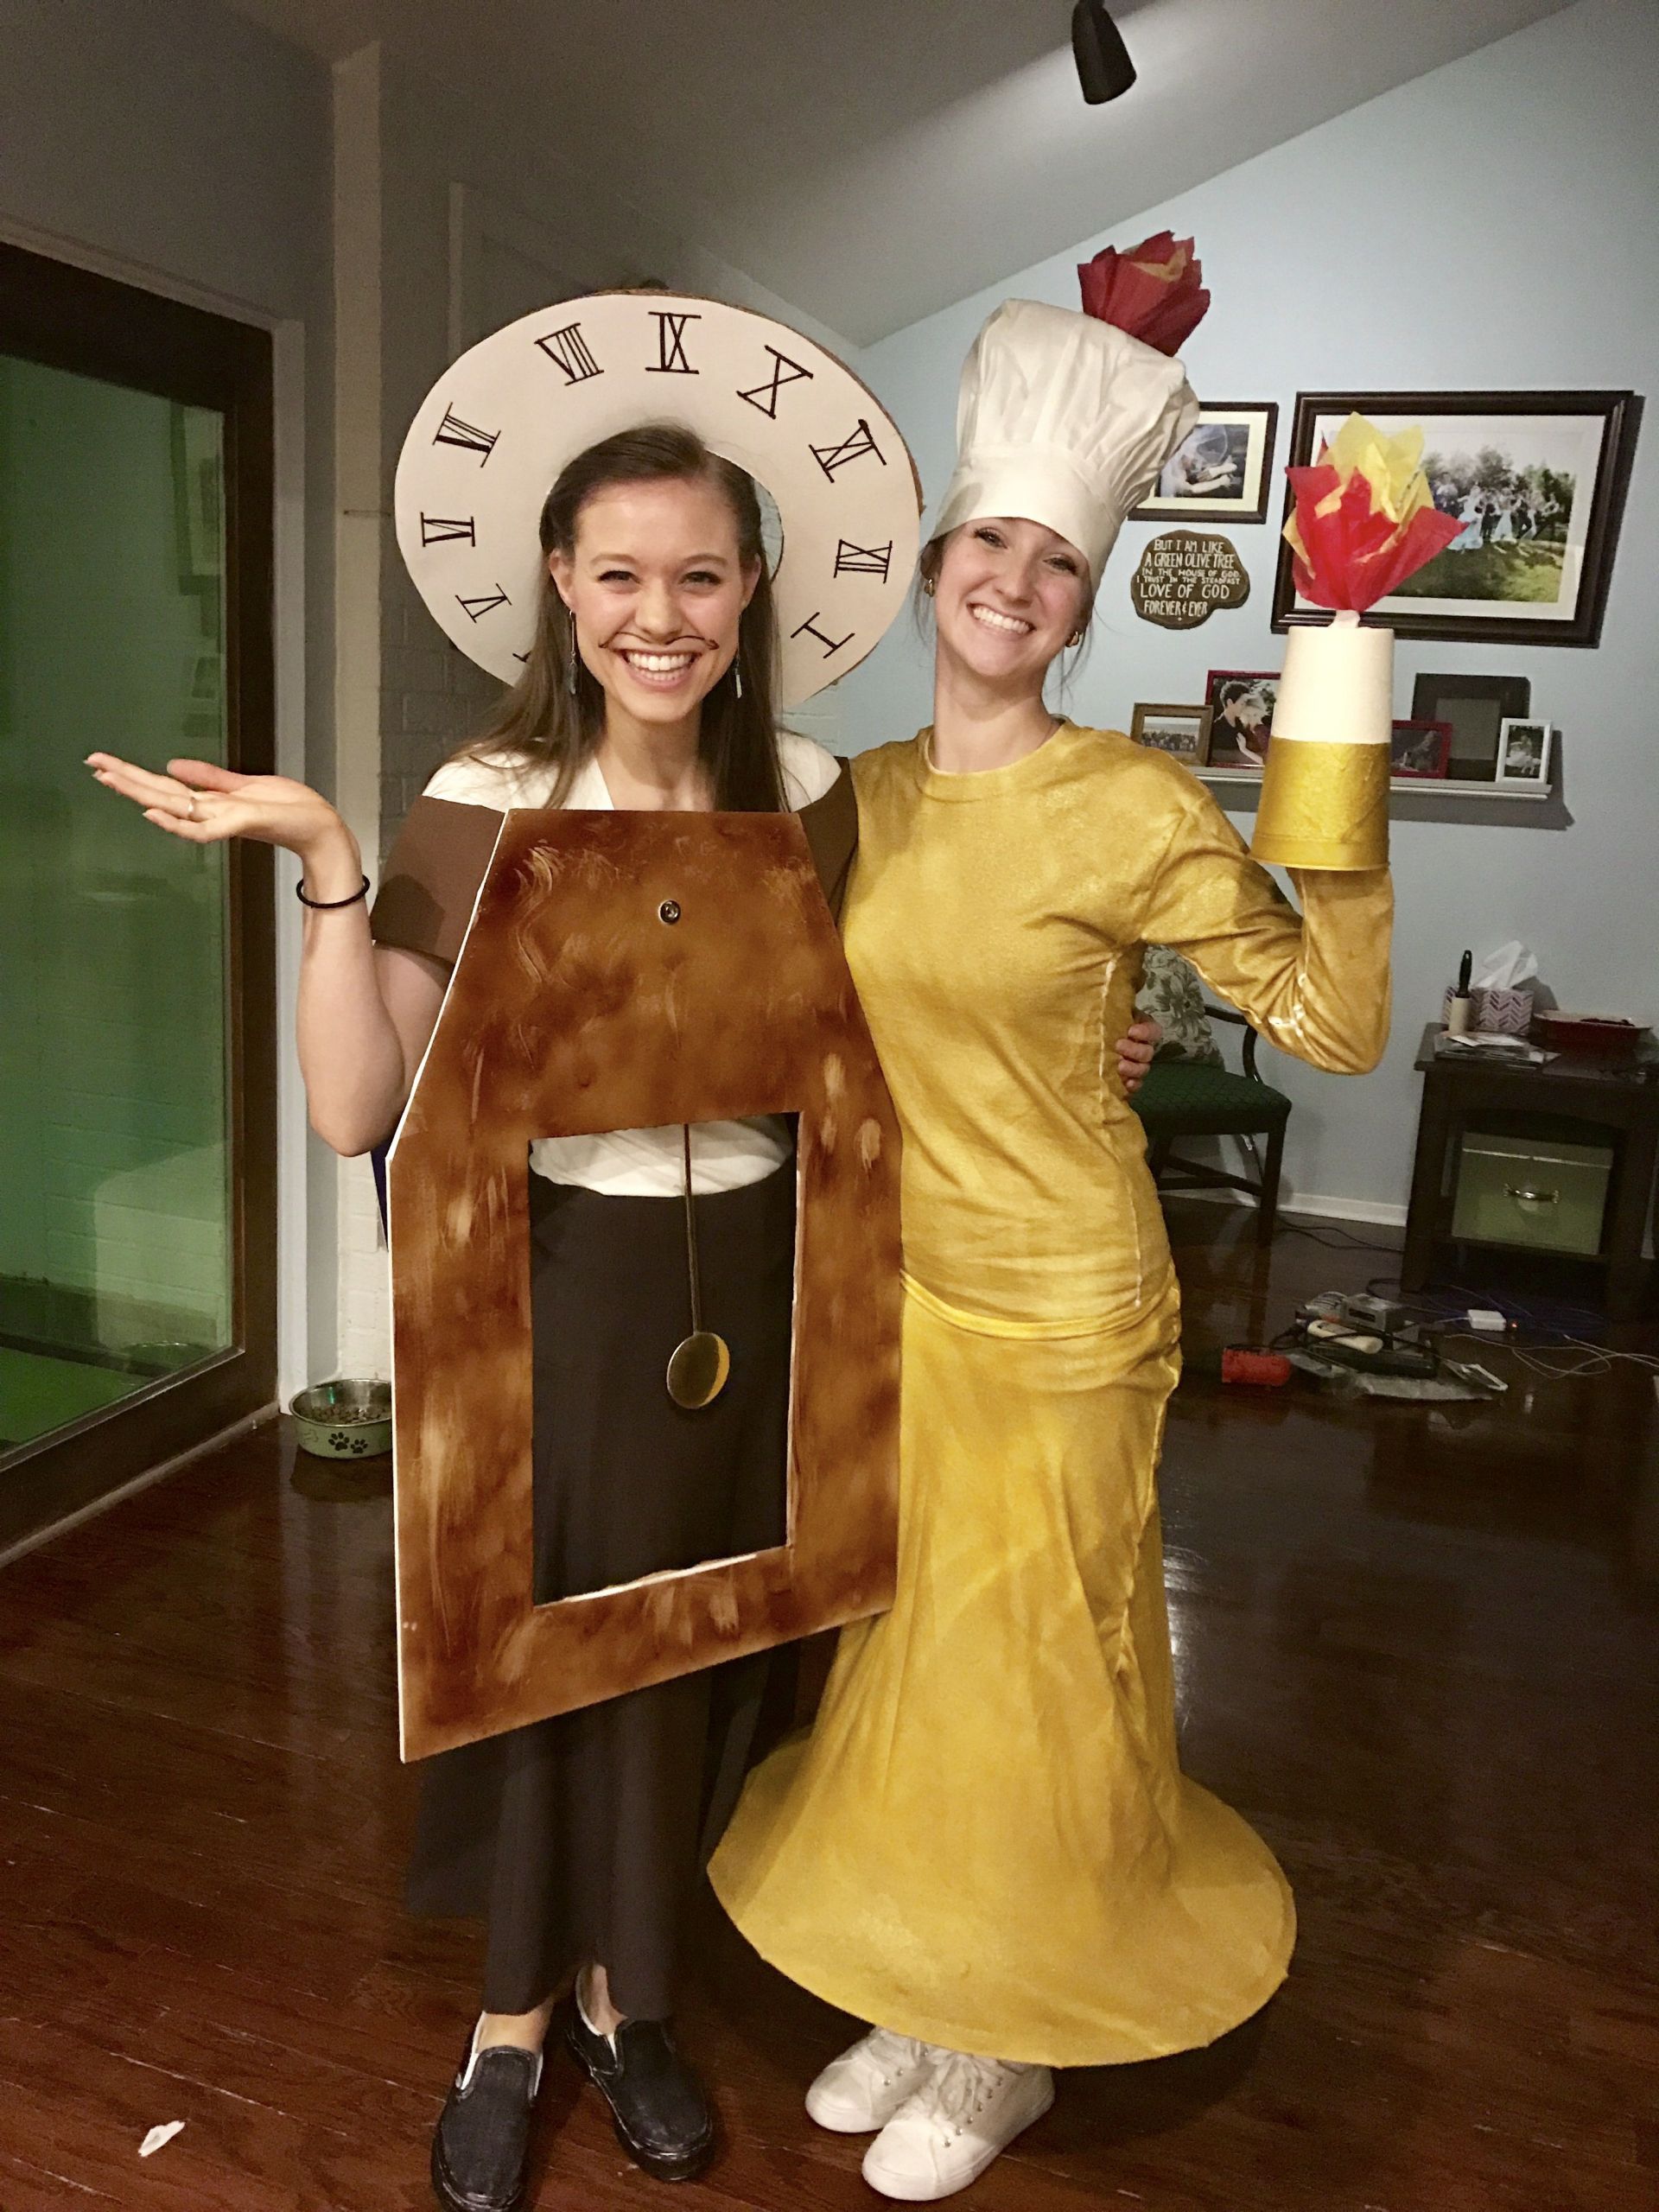 Beauty And The Beast DIY Costumes
 Cogsworth and Lumiere DIY Halloween costumes